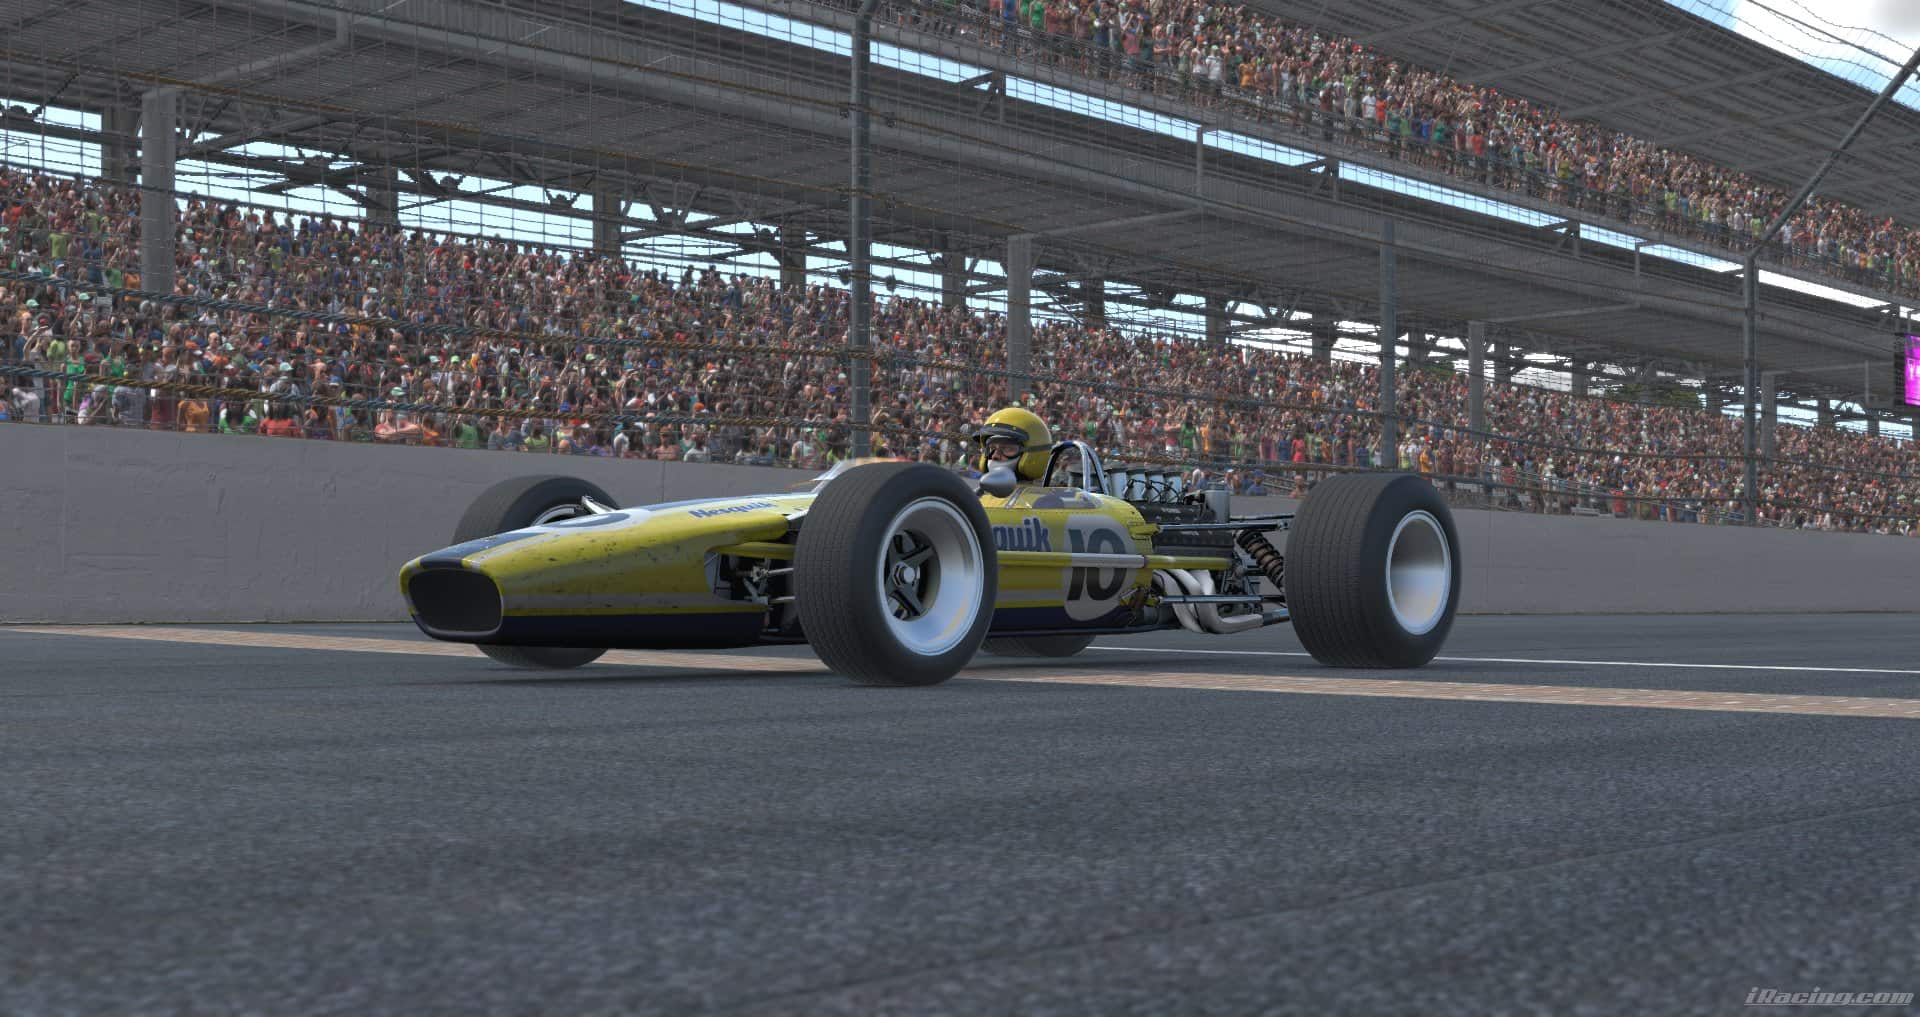 Jared Rexing survived the mayhem and scored the victory in the Elite Racing League Classic 500 on iRacing.